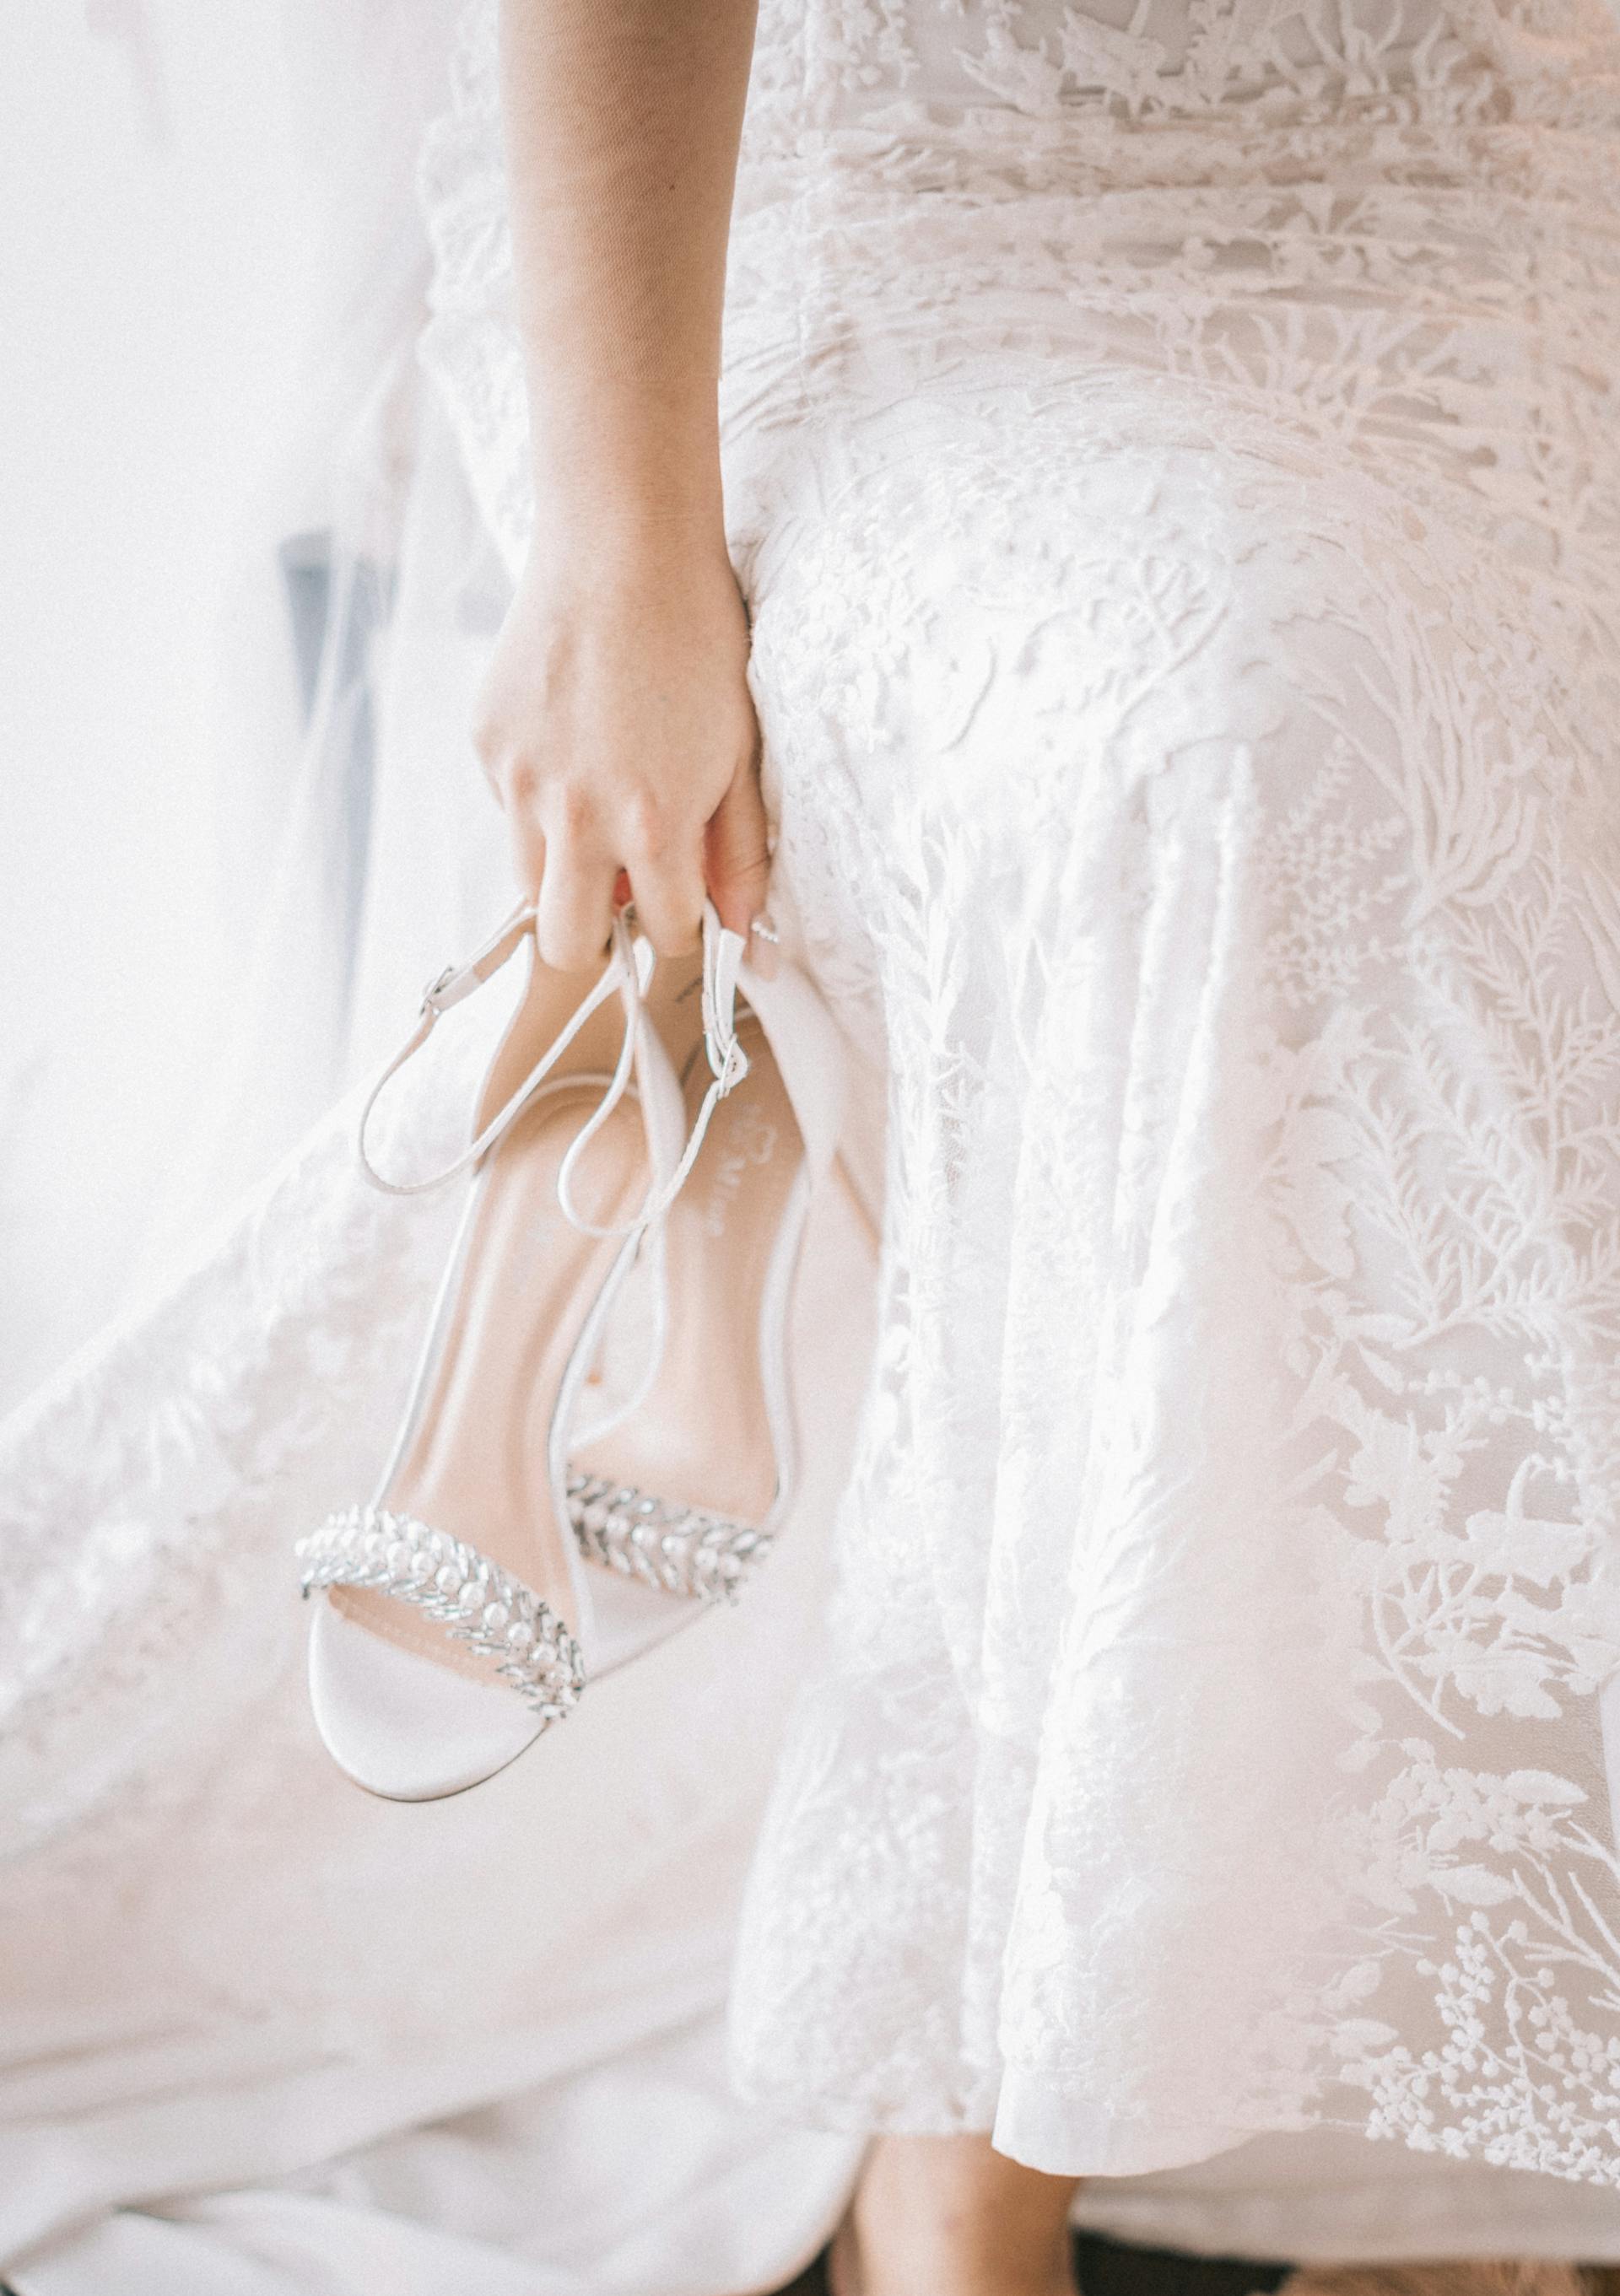 A woman in a white dress carrying shoes | Source: Pexels